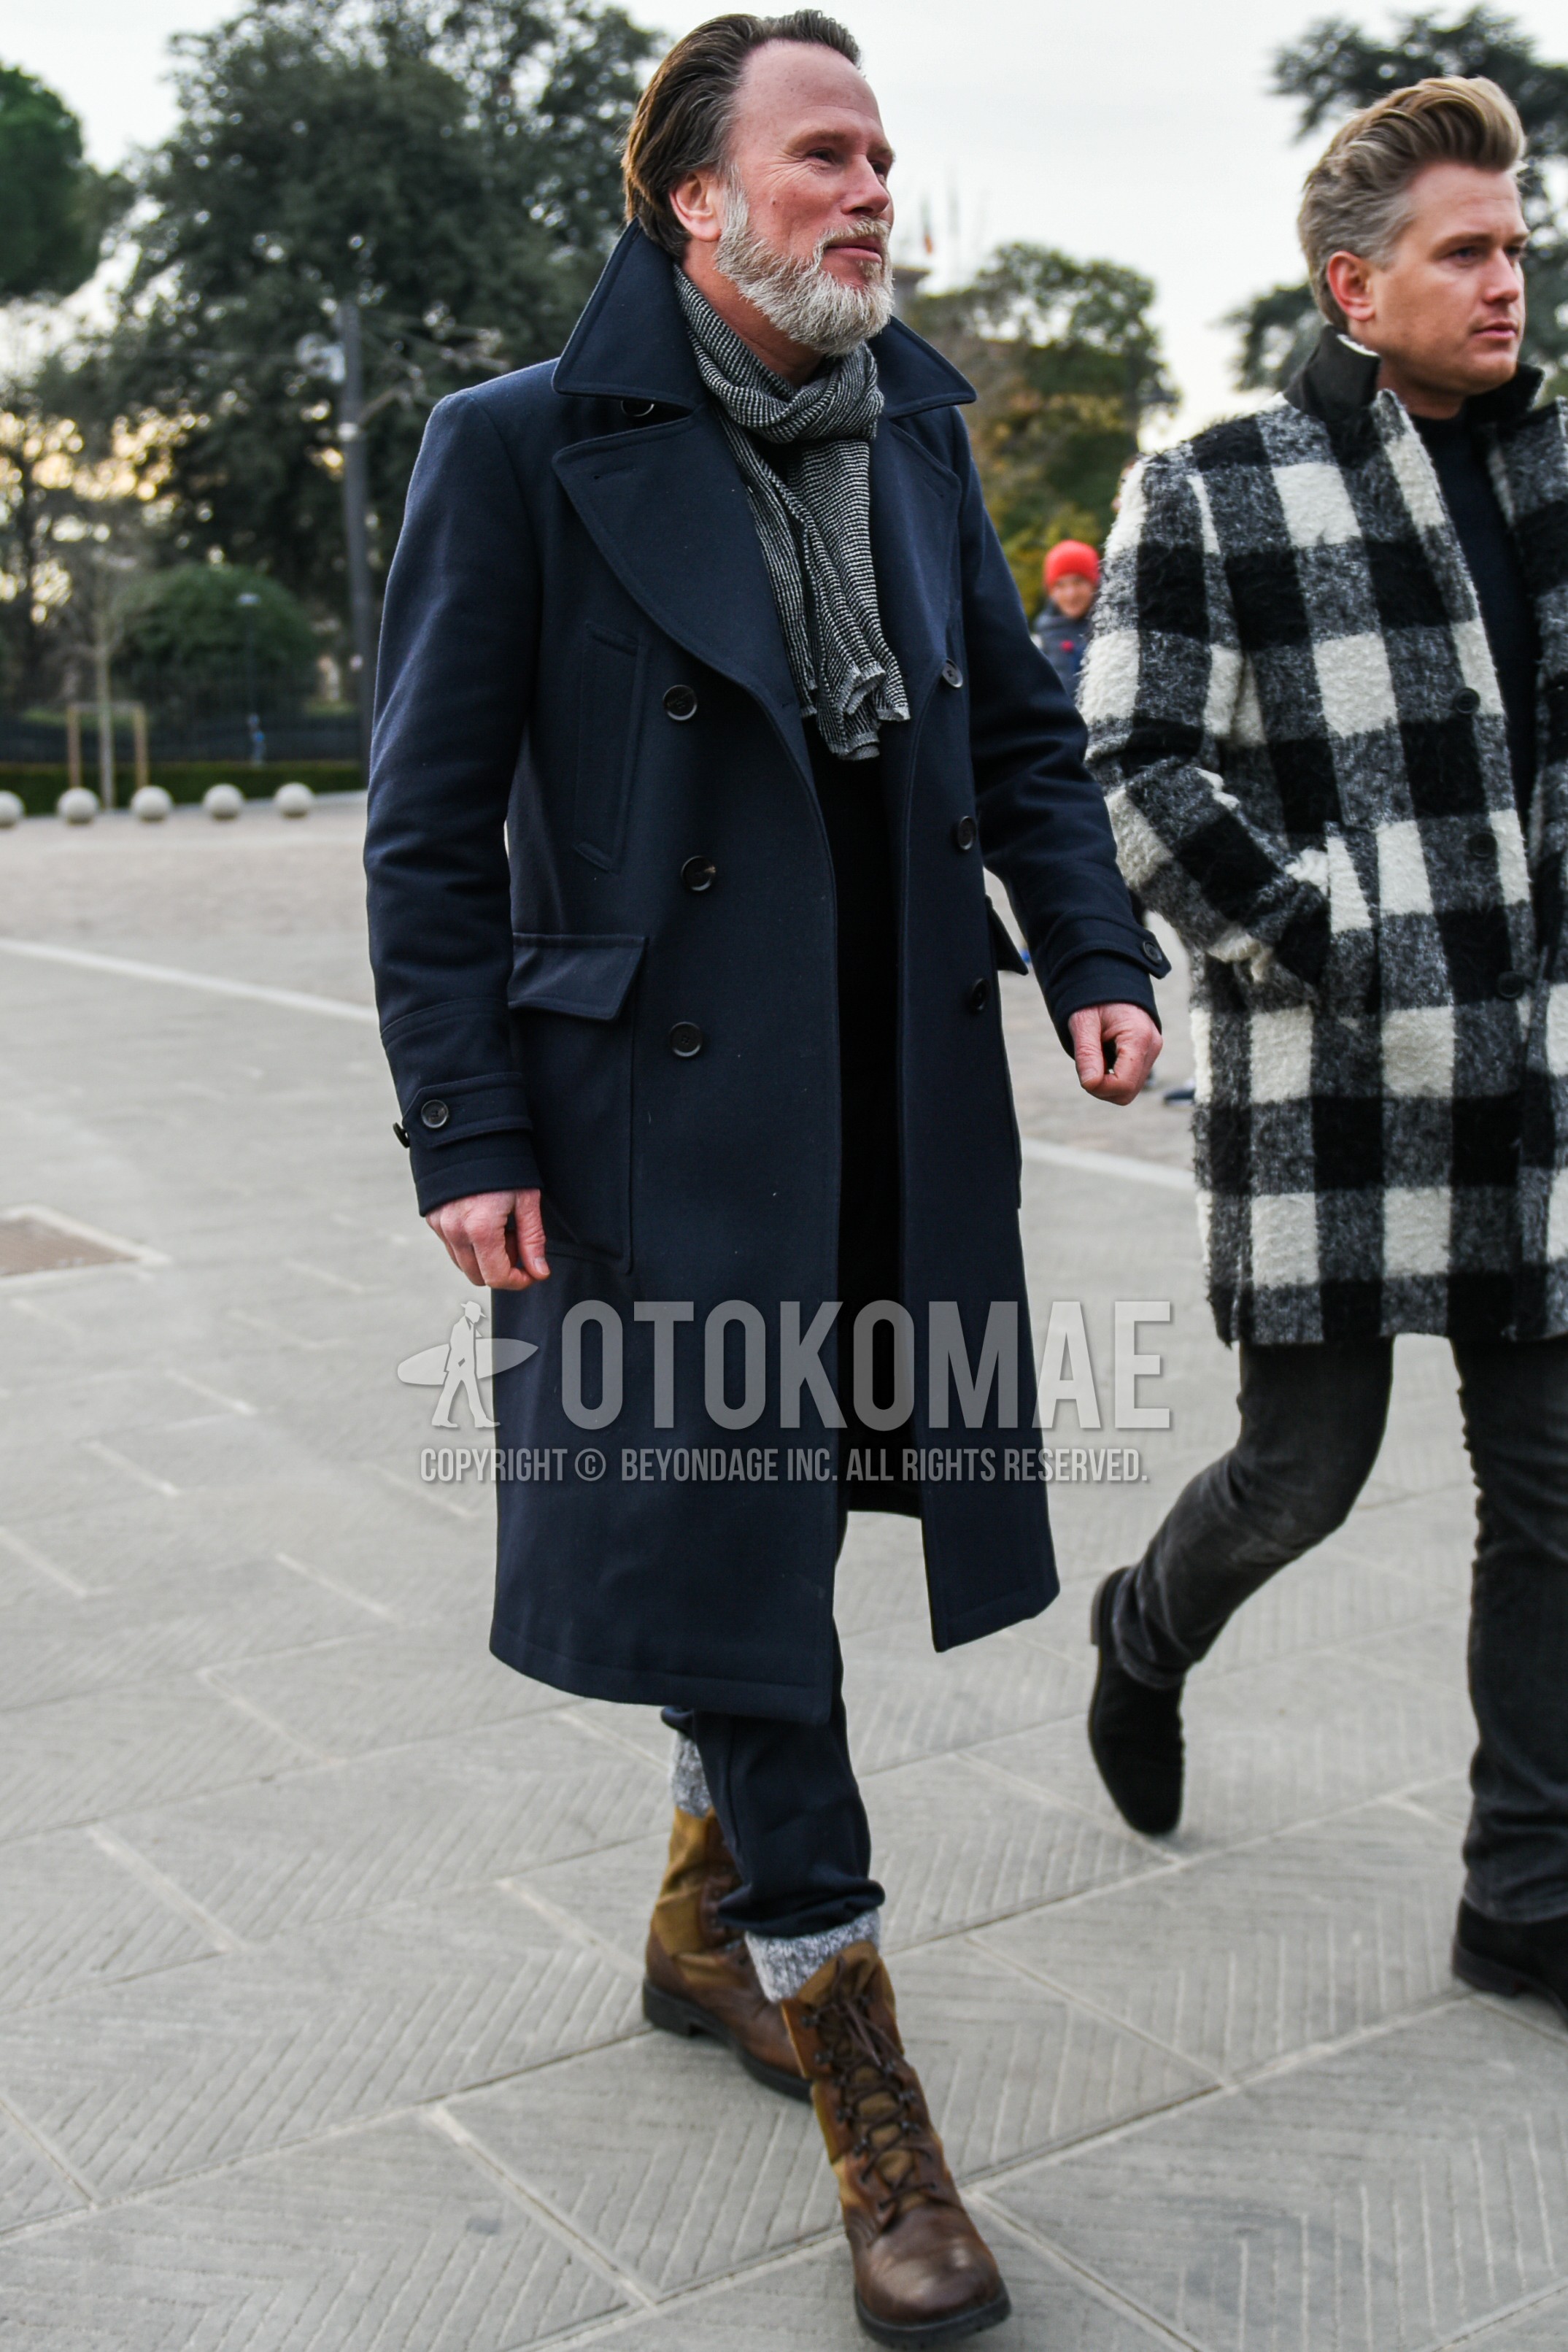 Men's autumn winter outfit with gray scarf scarf, navy plain ulster coat, navy plain slacks, gray socks socks, brown  boots.